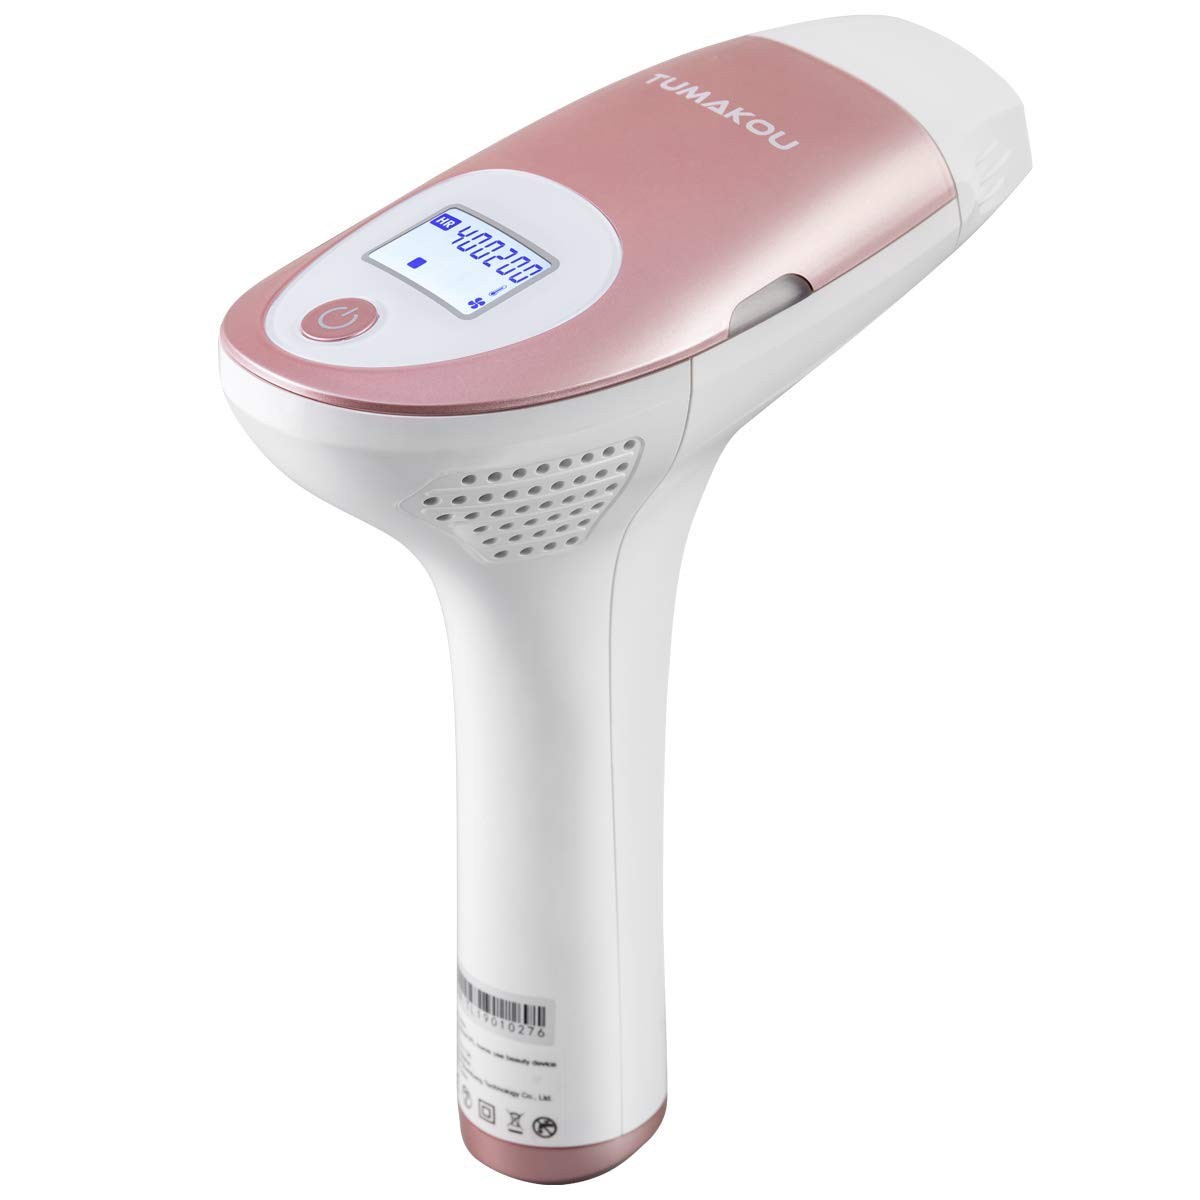 MONESAO IPL Hair Removal System - Painless Permanent IPL Hair Removal Device - With 5 Levels